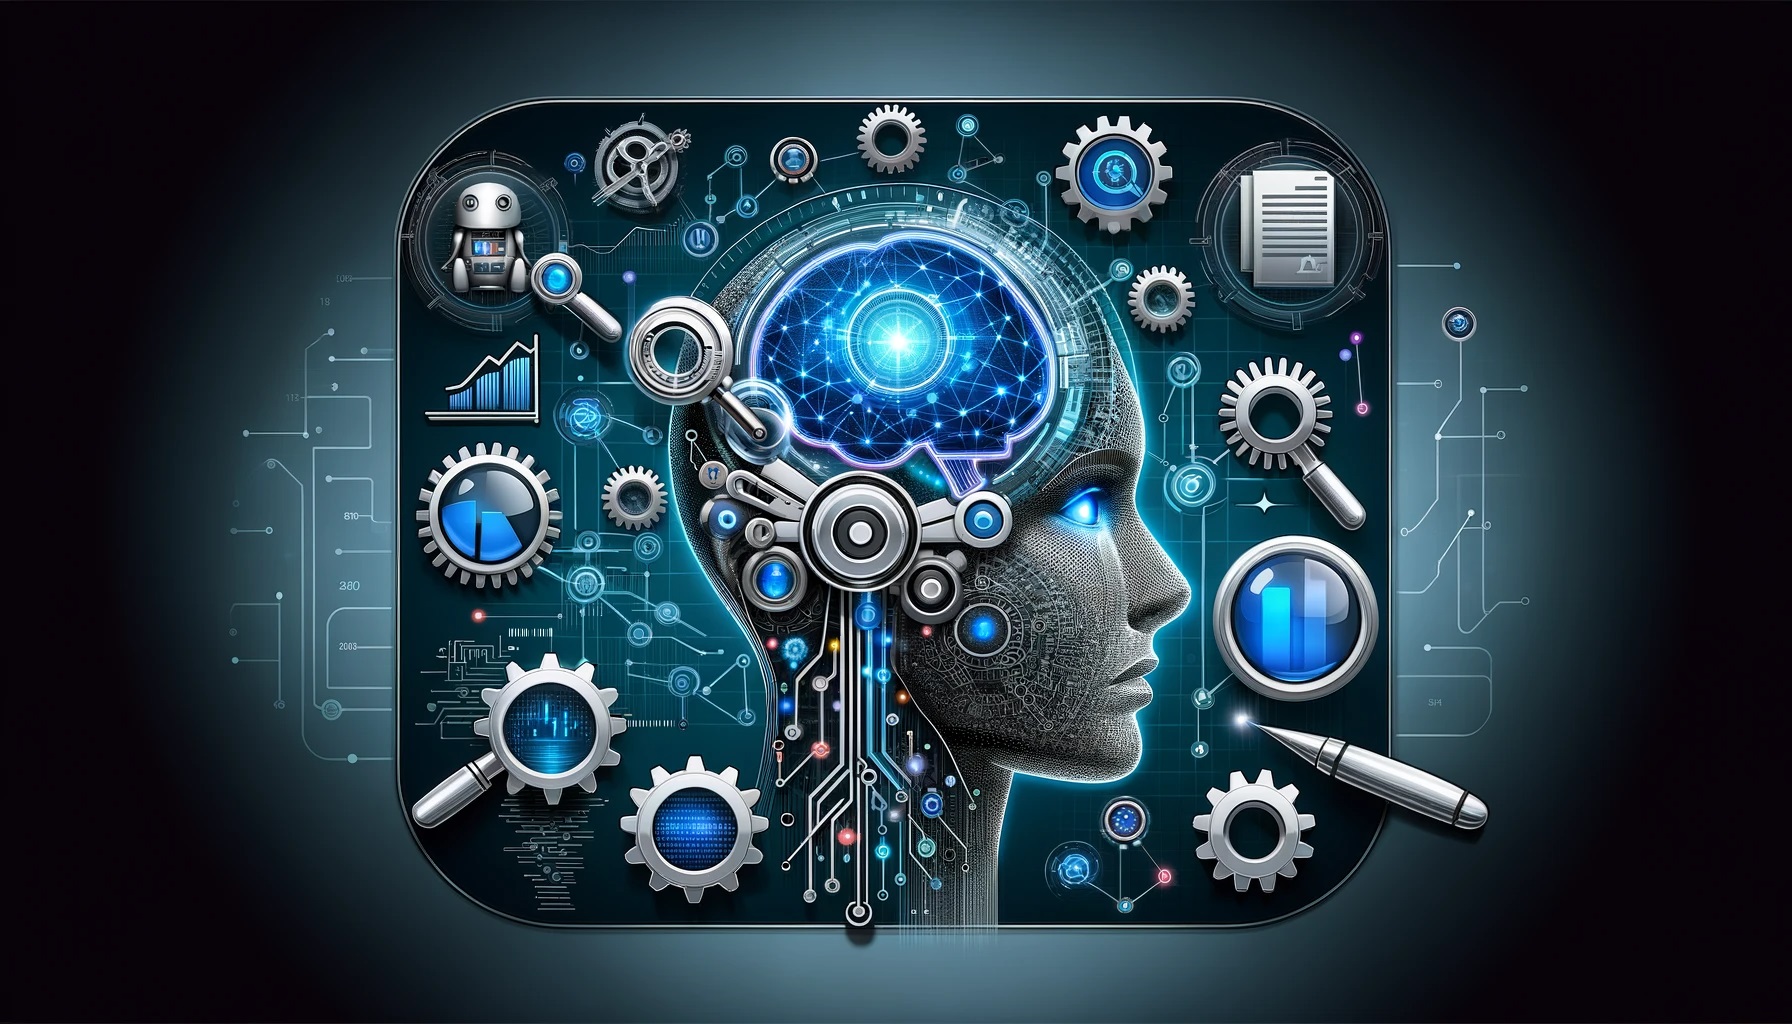 This wide-format image captures the essence of SEO and Artificial Intelligence through a display of futuristic and abstract elements. Central to the design is the silhouette of a humanoid head, sectioned to reveal a glowing digital brain, symbolizing AI. Around it are non-textual, abstract symbols such as magnifying glasses, gear wheels, and stylized rising graphs, representing the various facets of SEO. The color scheme is a mix of deep blues and bright neon, set against a sleek, dark background to convey a sense of cutting-edge technology and digital progress.